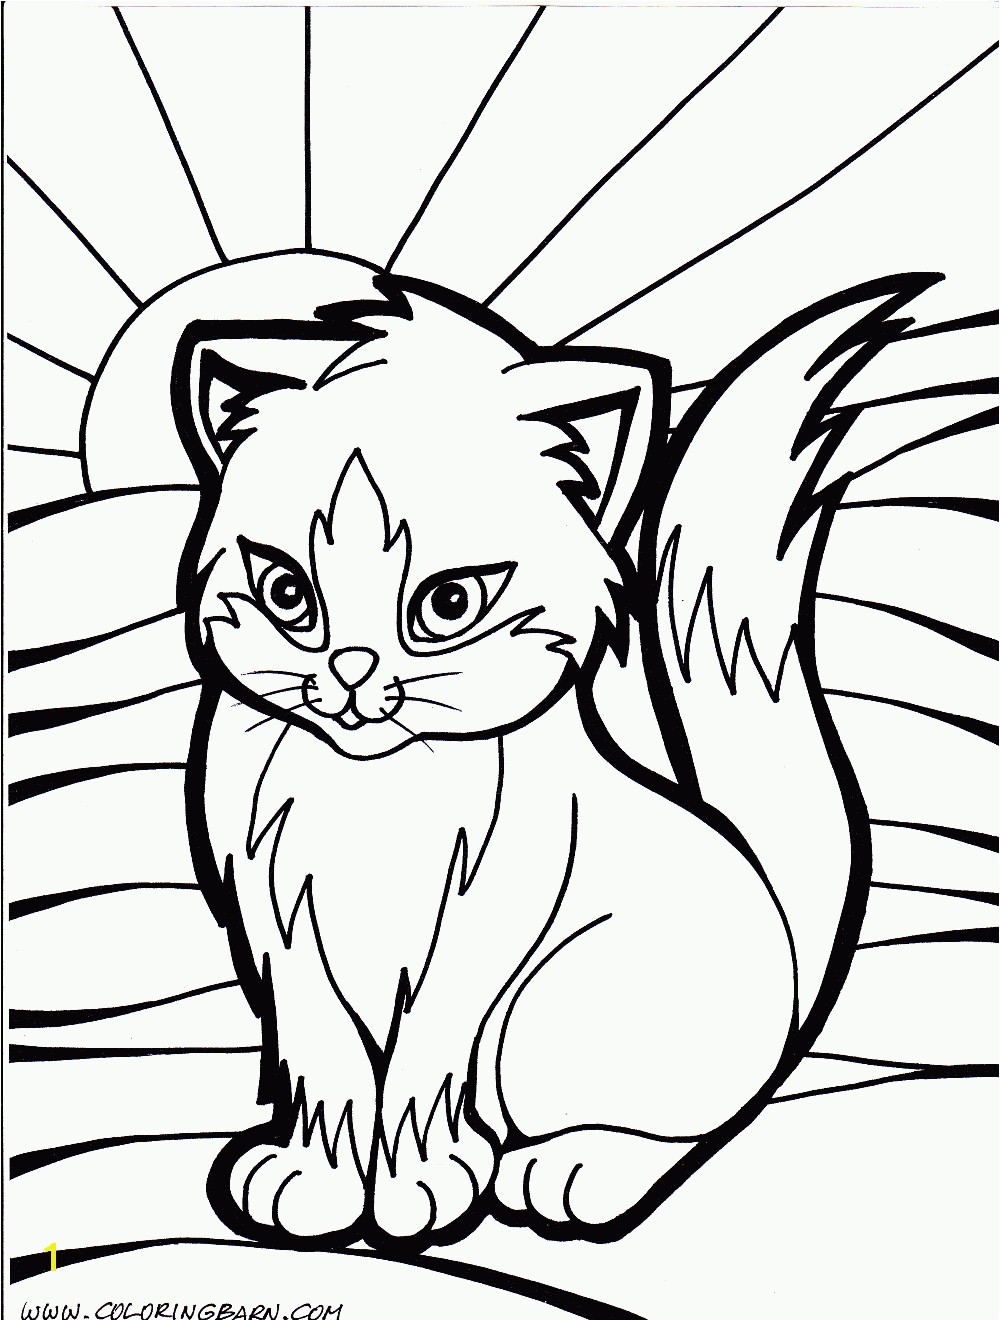 Kitty Cat Coloring Pages to Print Cat Color Pages Printable